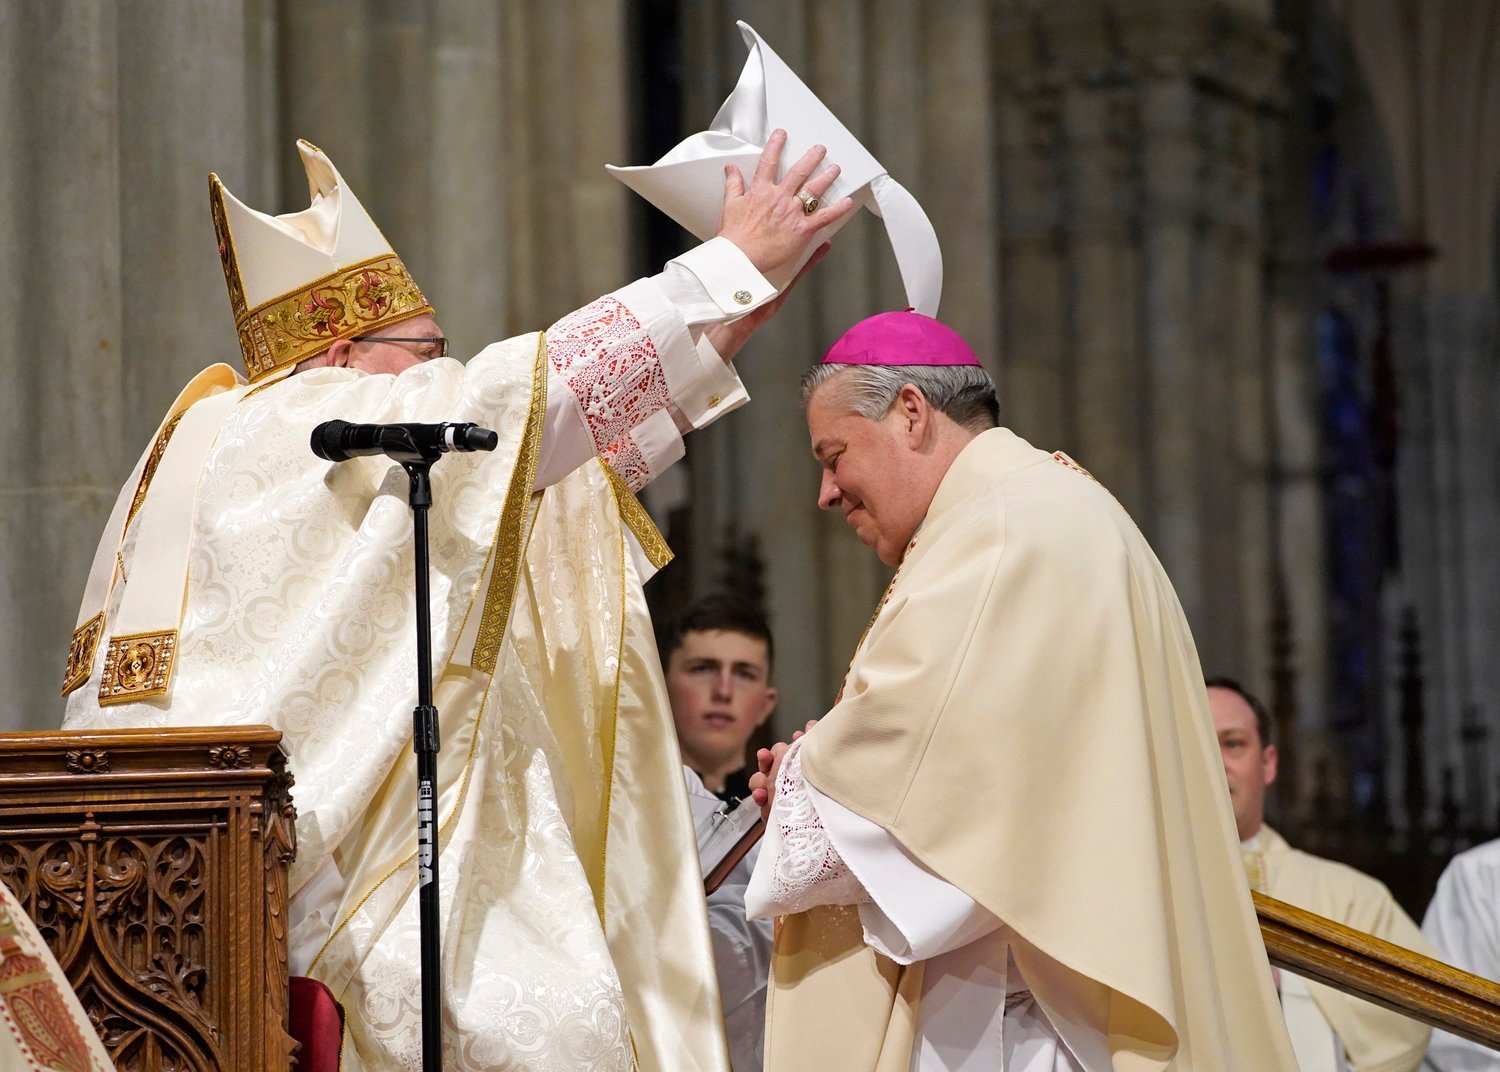 Cardinal Dolan places a miter on the head of Auxiliary Bishop John S. Bonnici, 57, during his episcopal ordination March 1 at St. Patrick's Cathedral.